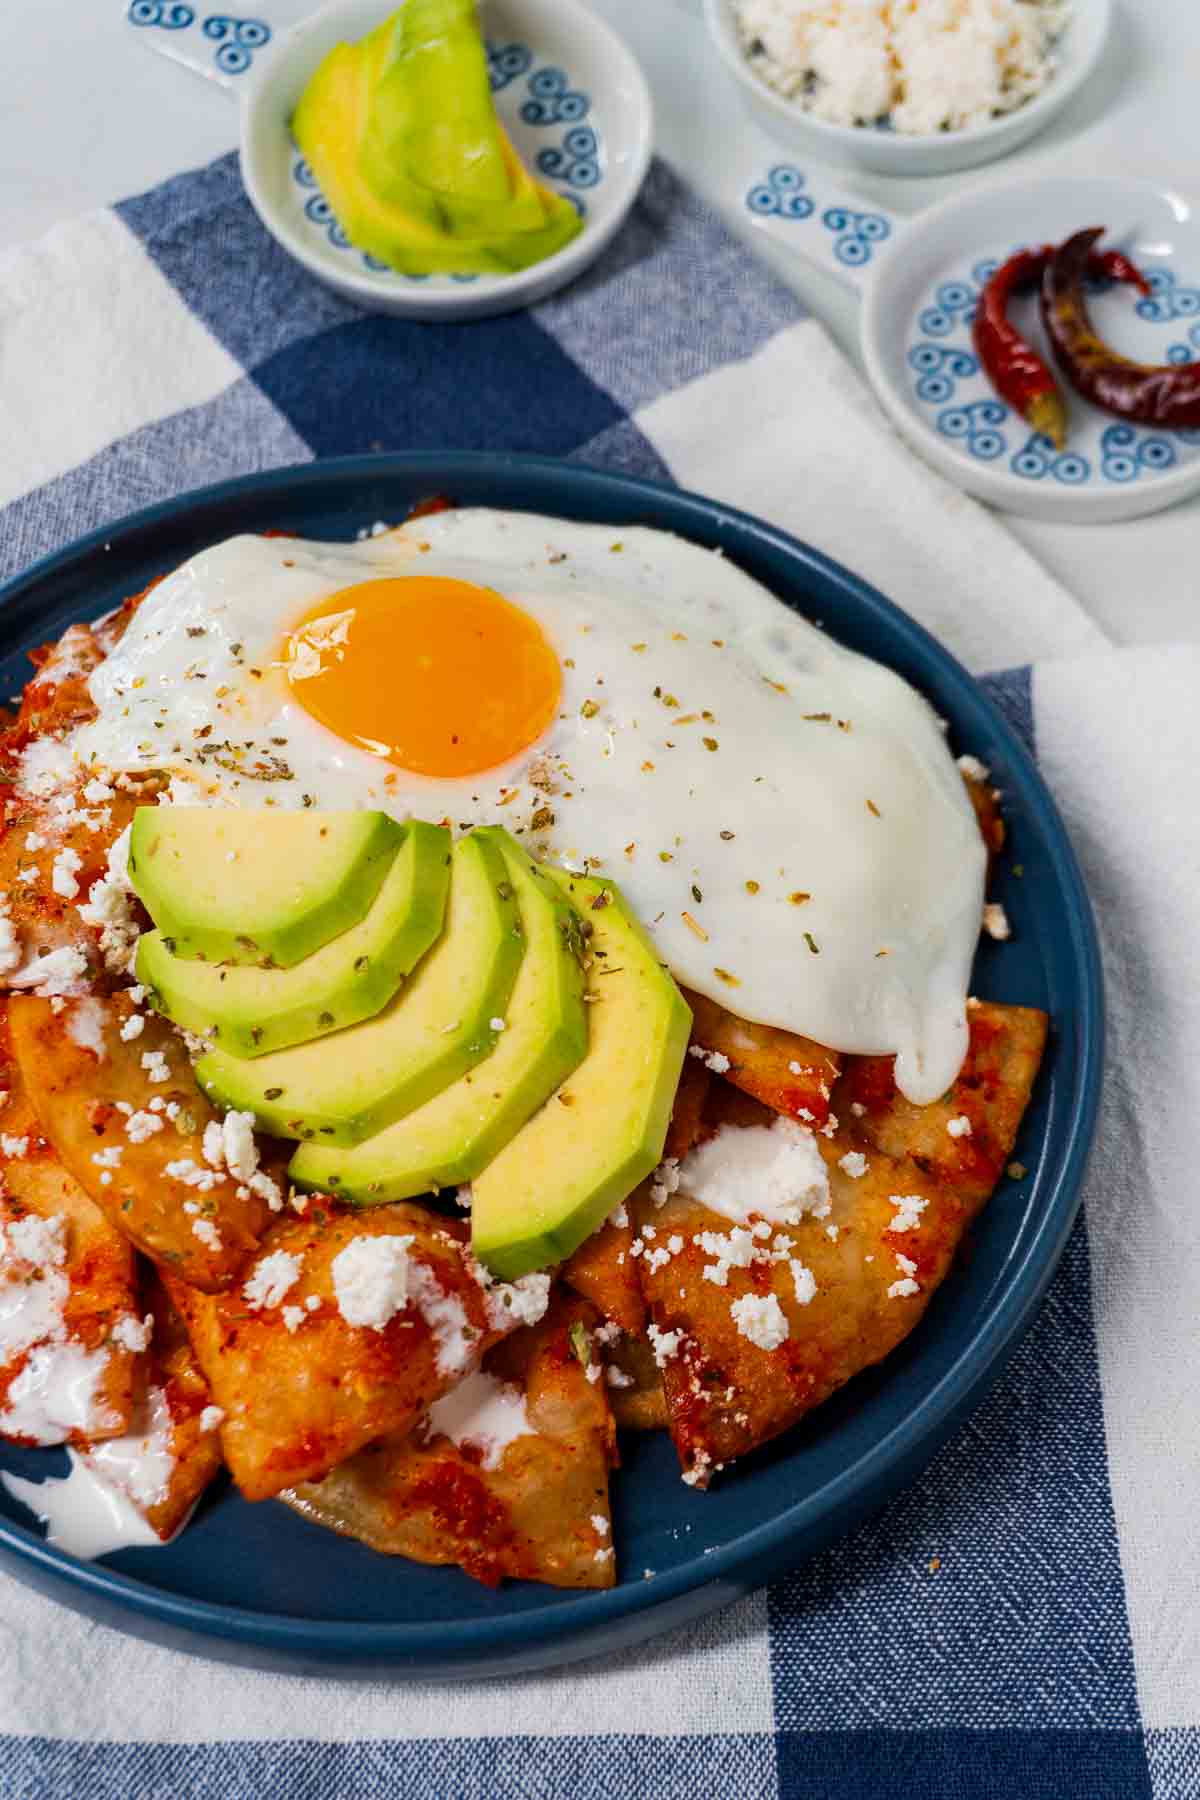 A plateful of Mexican chilaquiles rojos served with a fried egg, avocado slices, crema, and queso fresco.